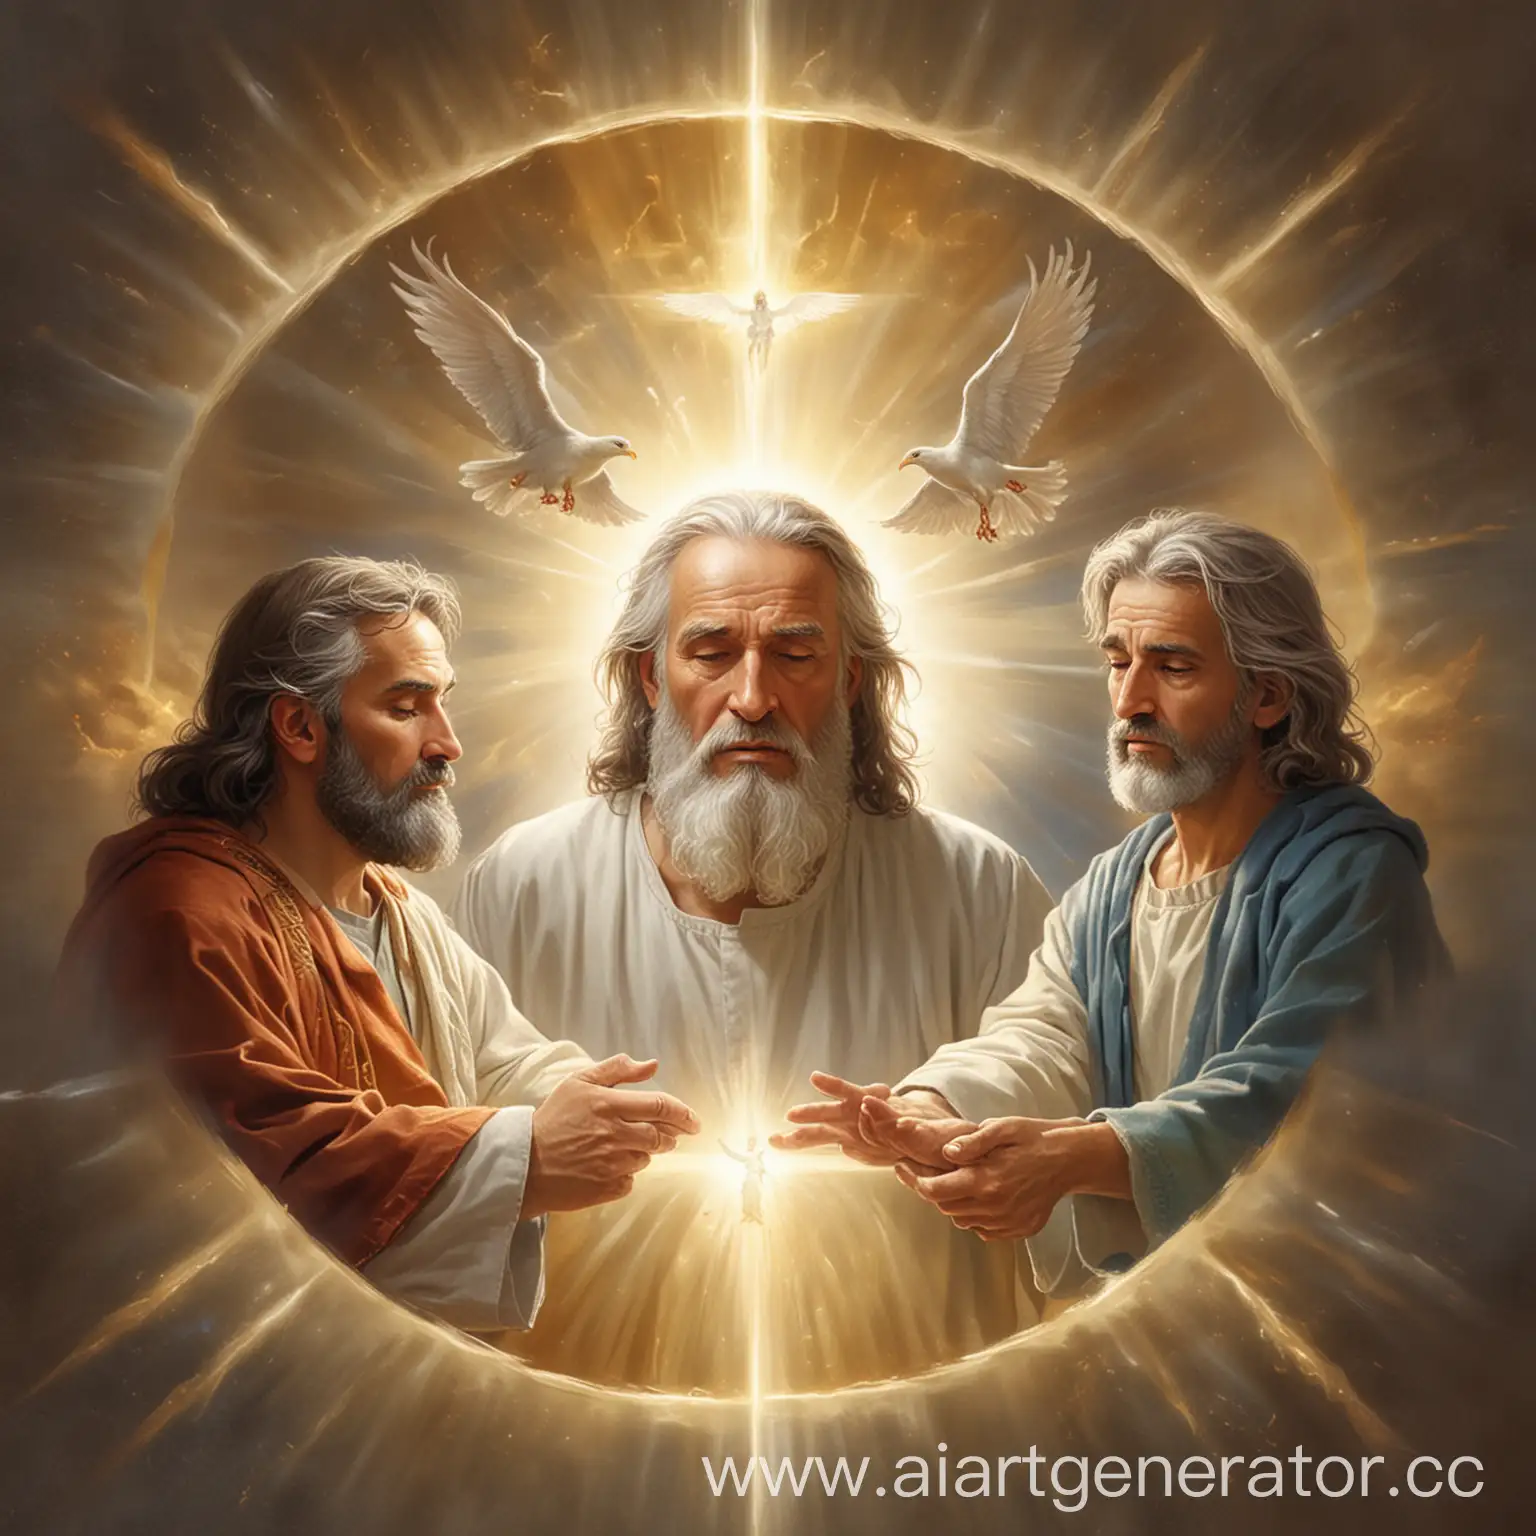 Divine-Trinity-Depicted-God-the-Father-God-the-Son-and-Holy-Spirit-in-Sacred-Art